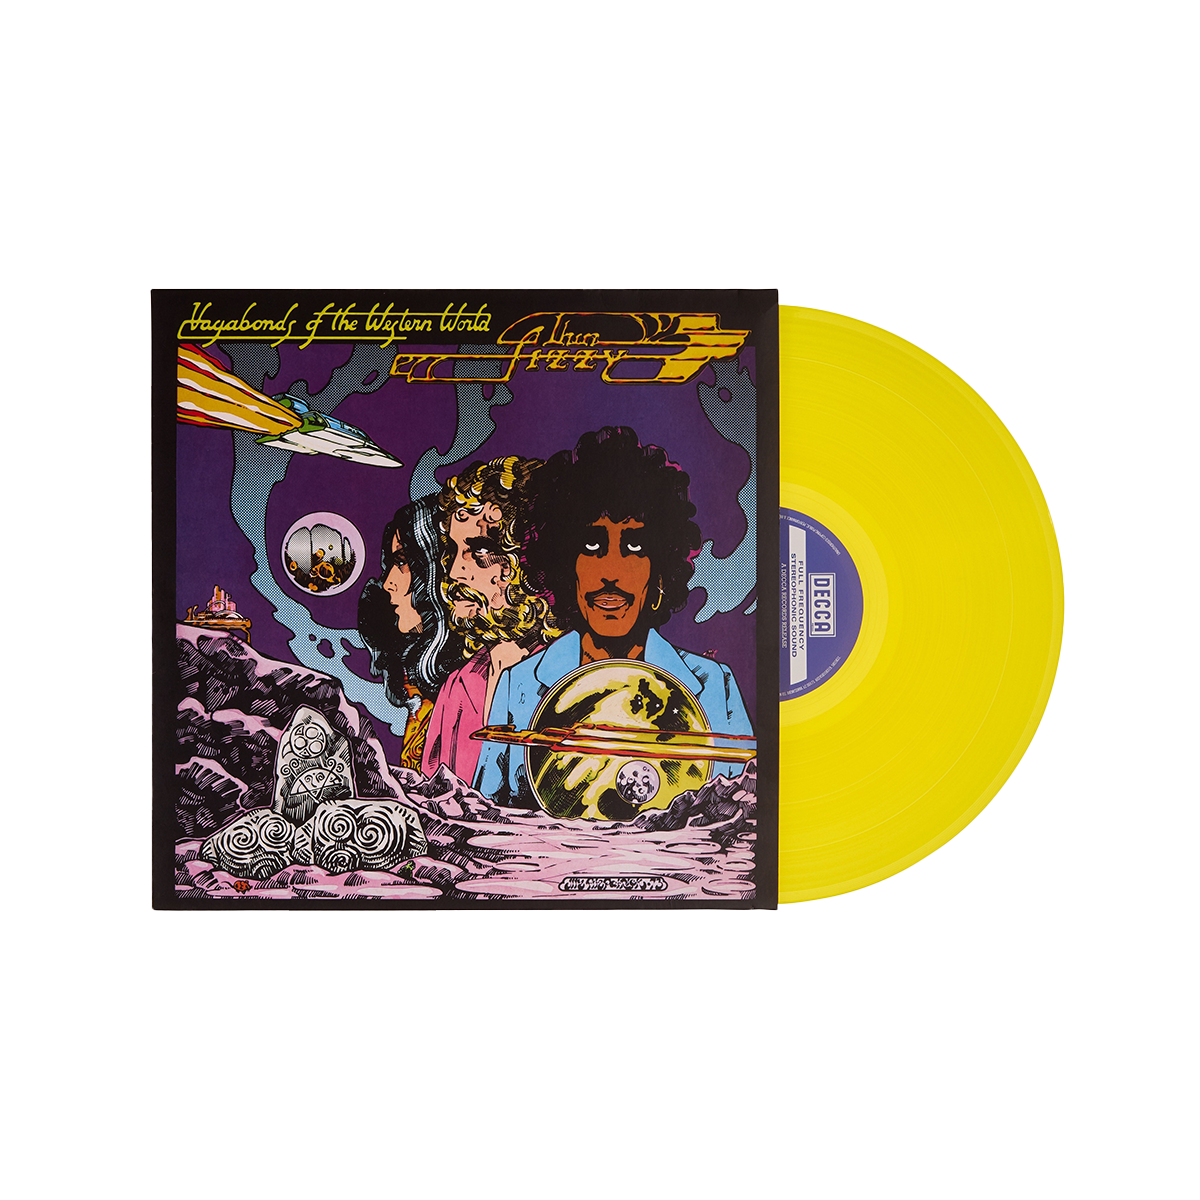 Thin Lizzy - Vagabonds of the Western World (Deluxe Reissue): Limited Yellow Vinyl LP